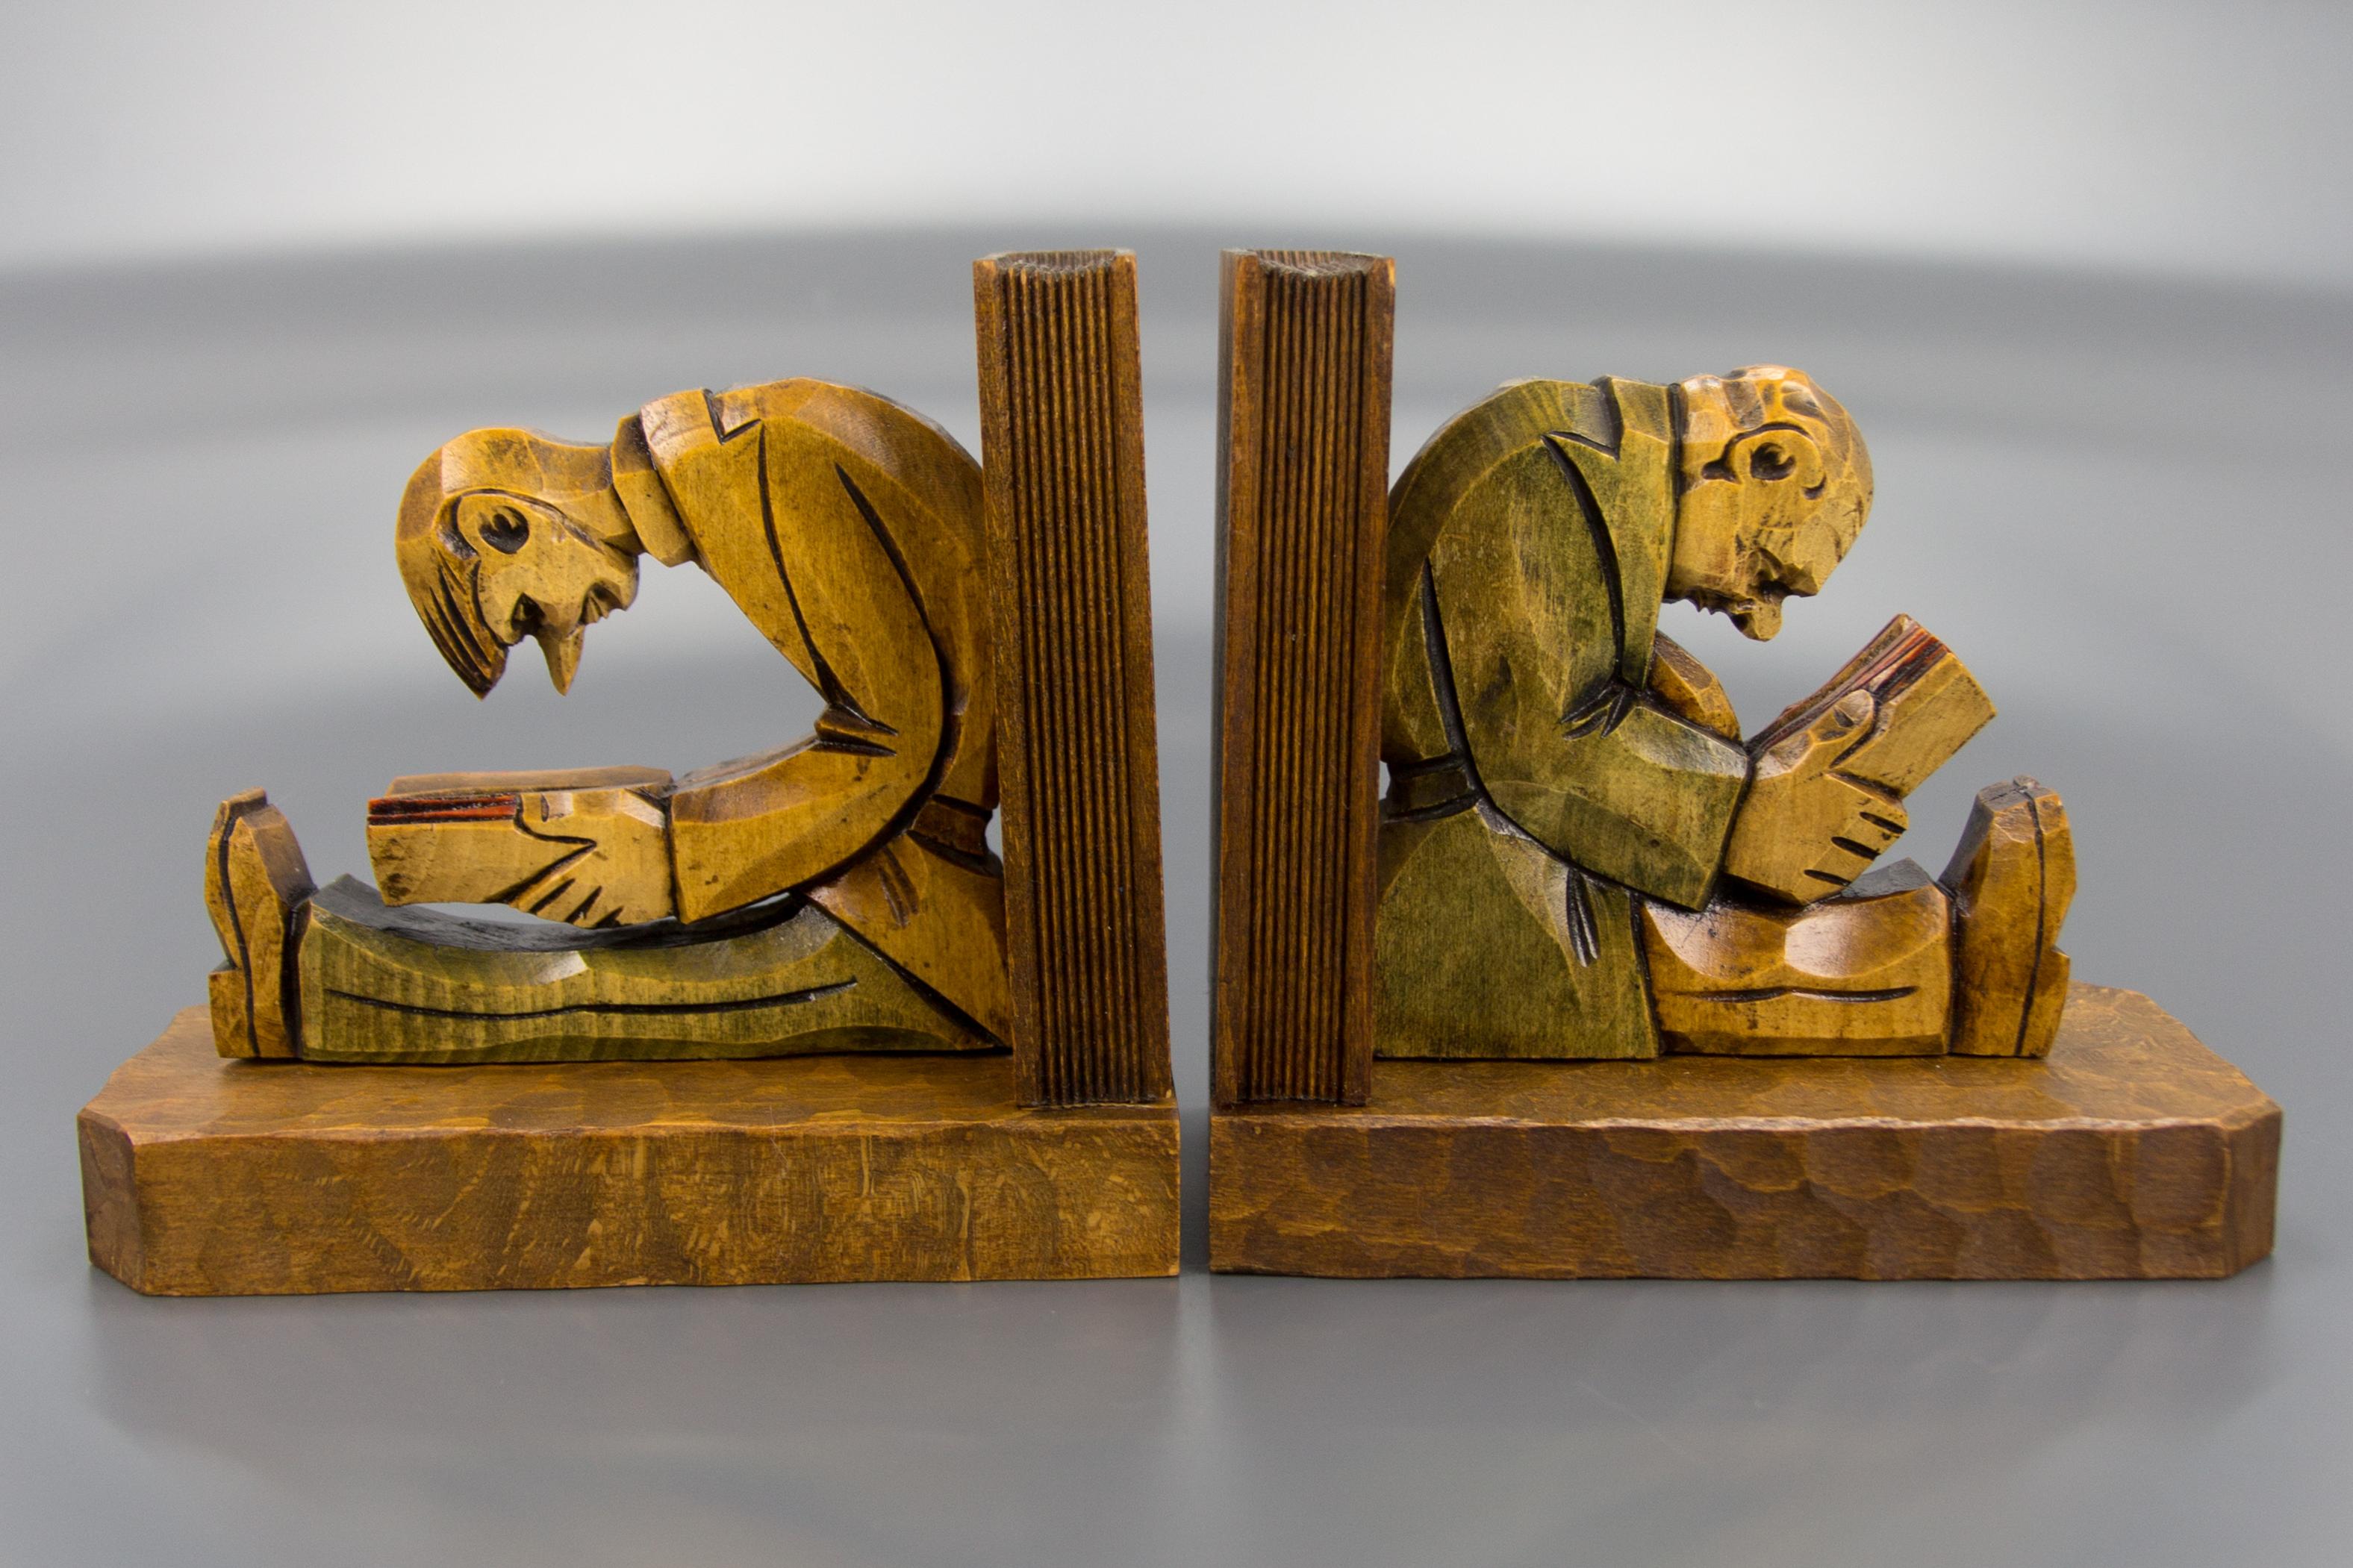 These beautifully hand carved wooden bookends feature sculptures of two sitting and reading man, an older and younger man that could be a teacher and a student. Both sit leaning on supports that are carved in the form of books. Slightly toned in